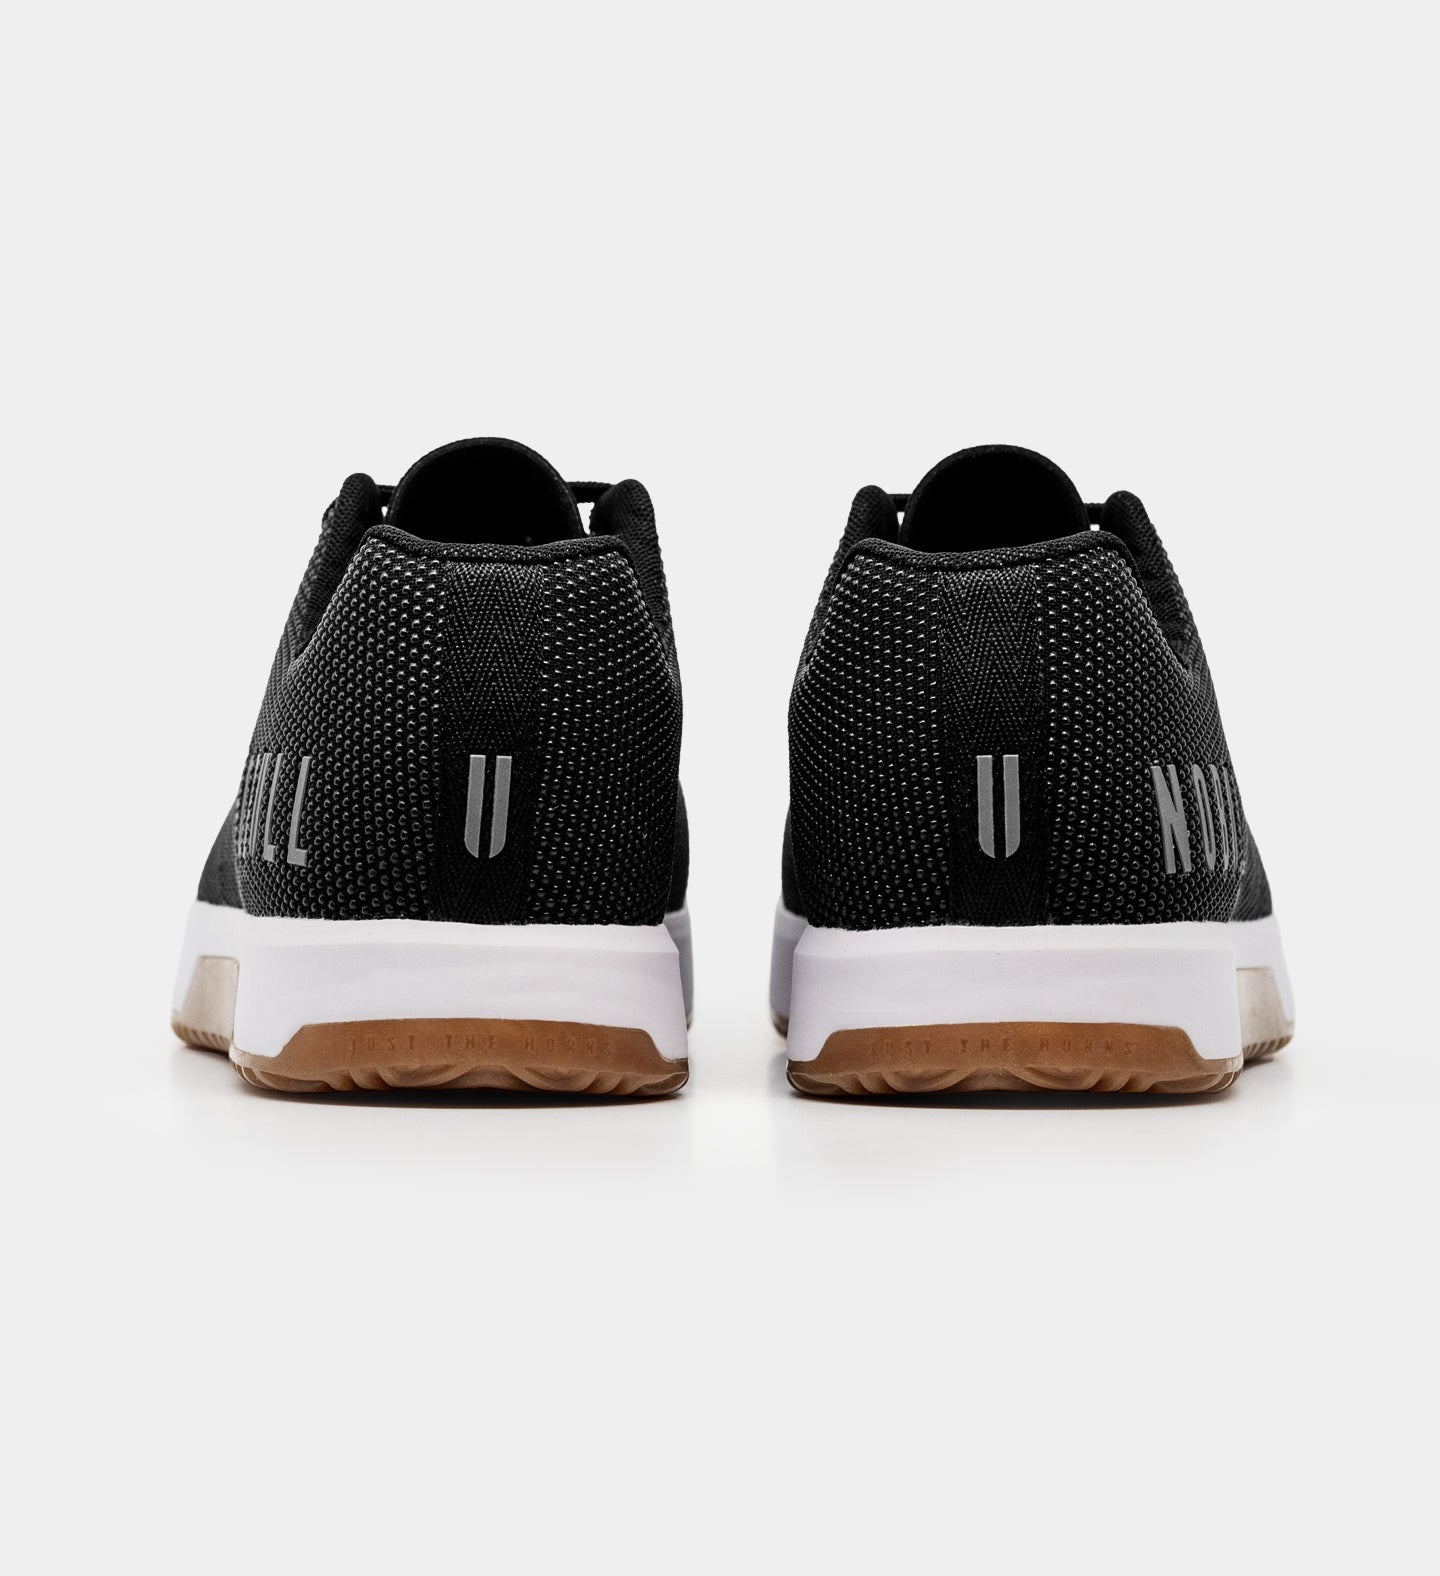 NOBULL - Introducing the High-Top White Trainer, the